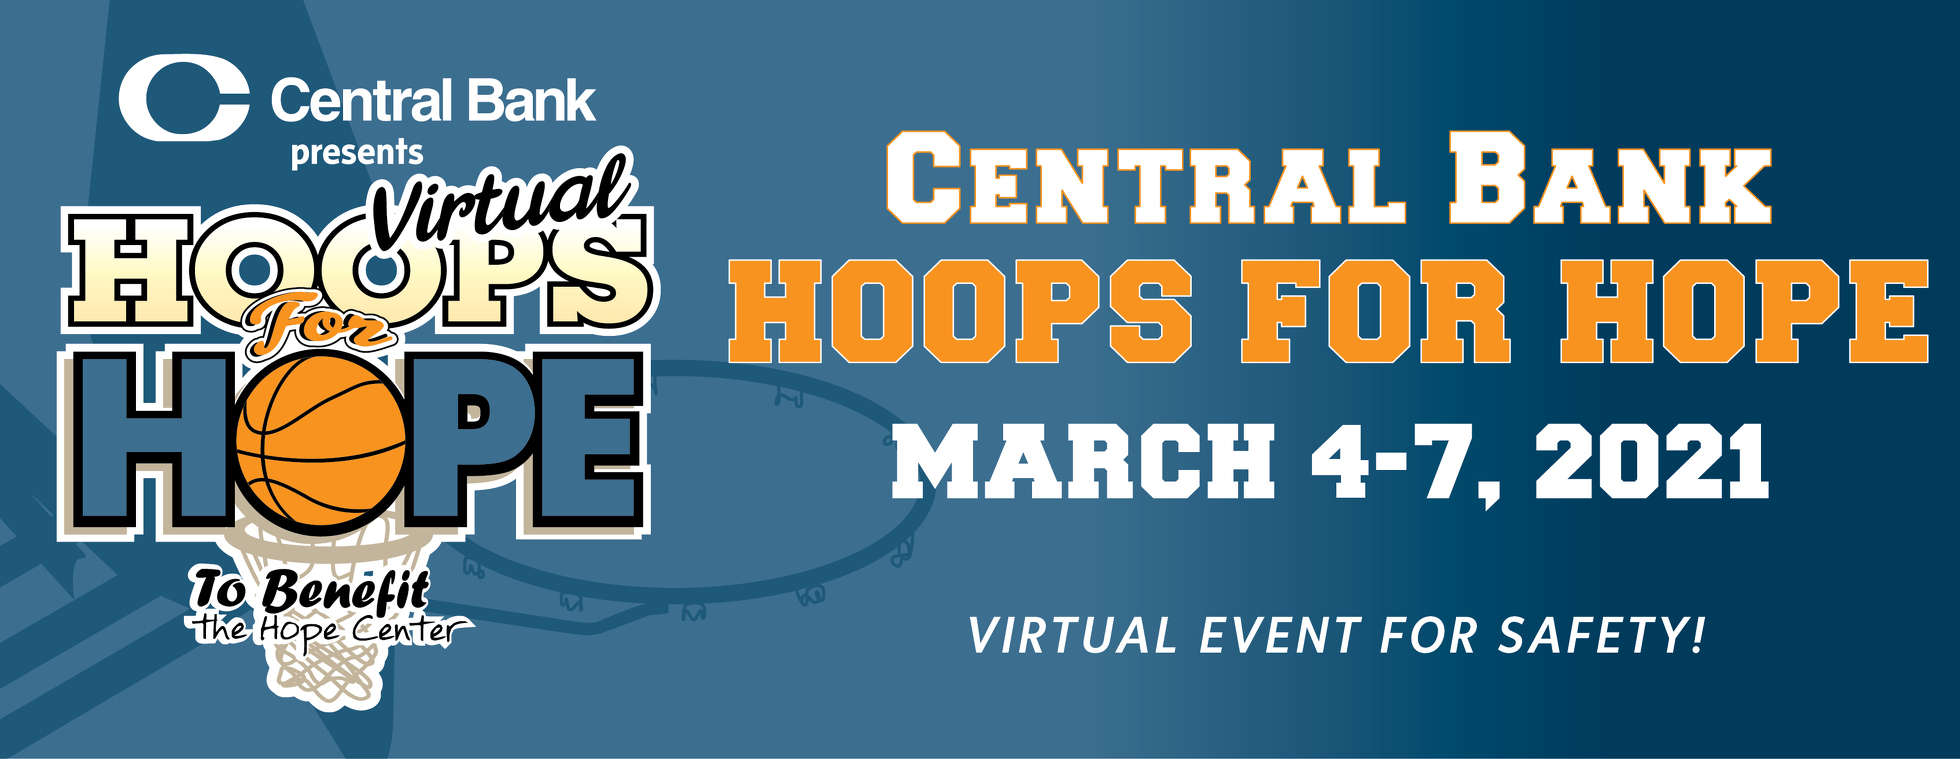 2021 Central Bank Virtual Hoops for Hope